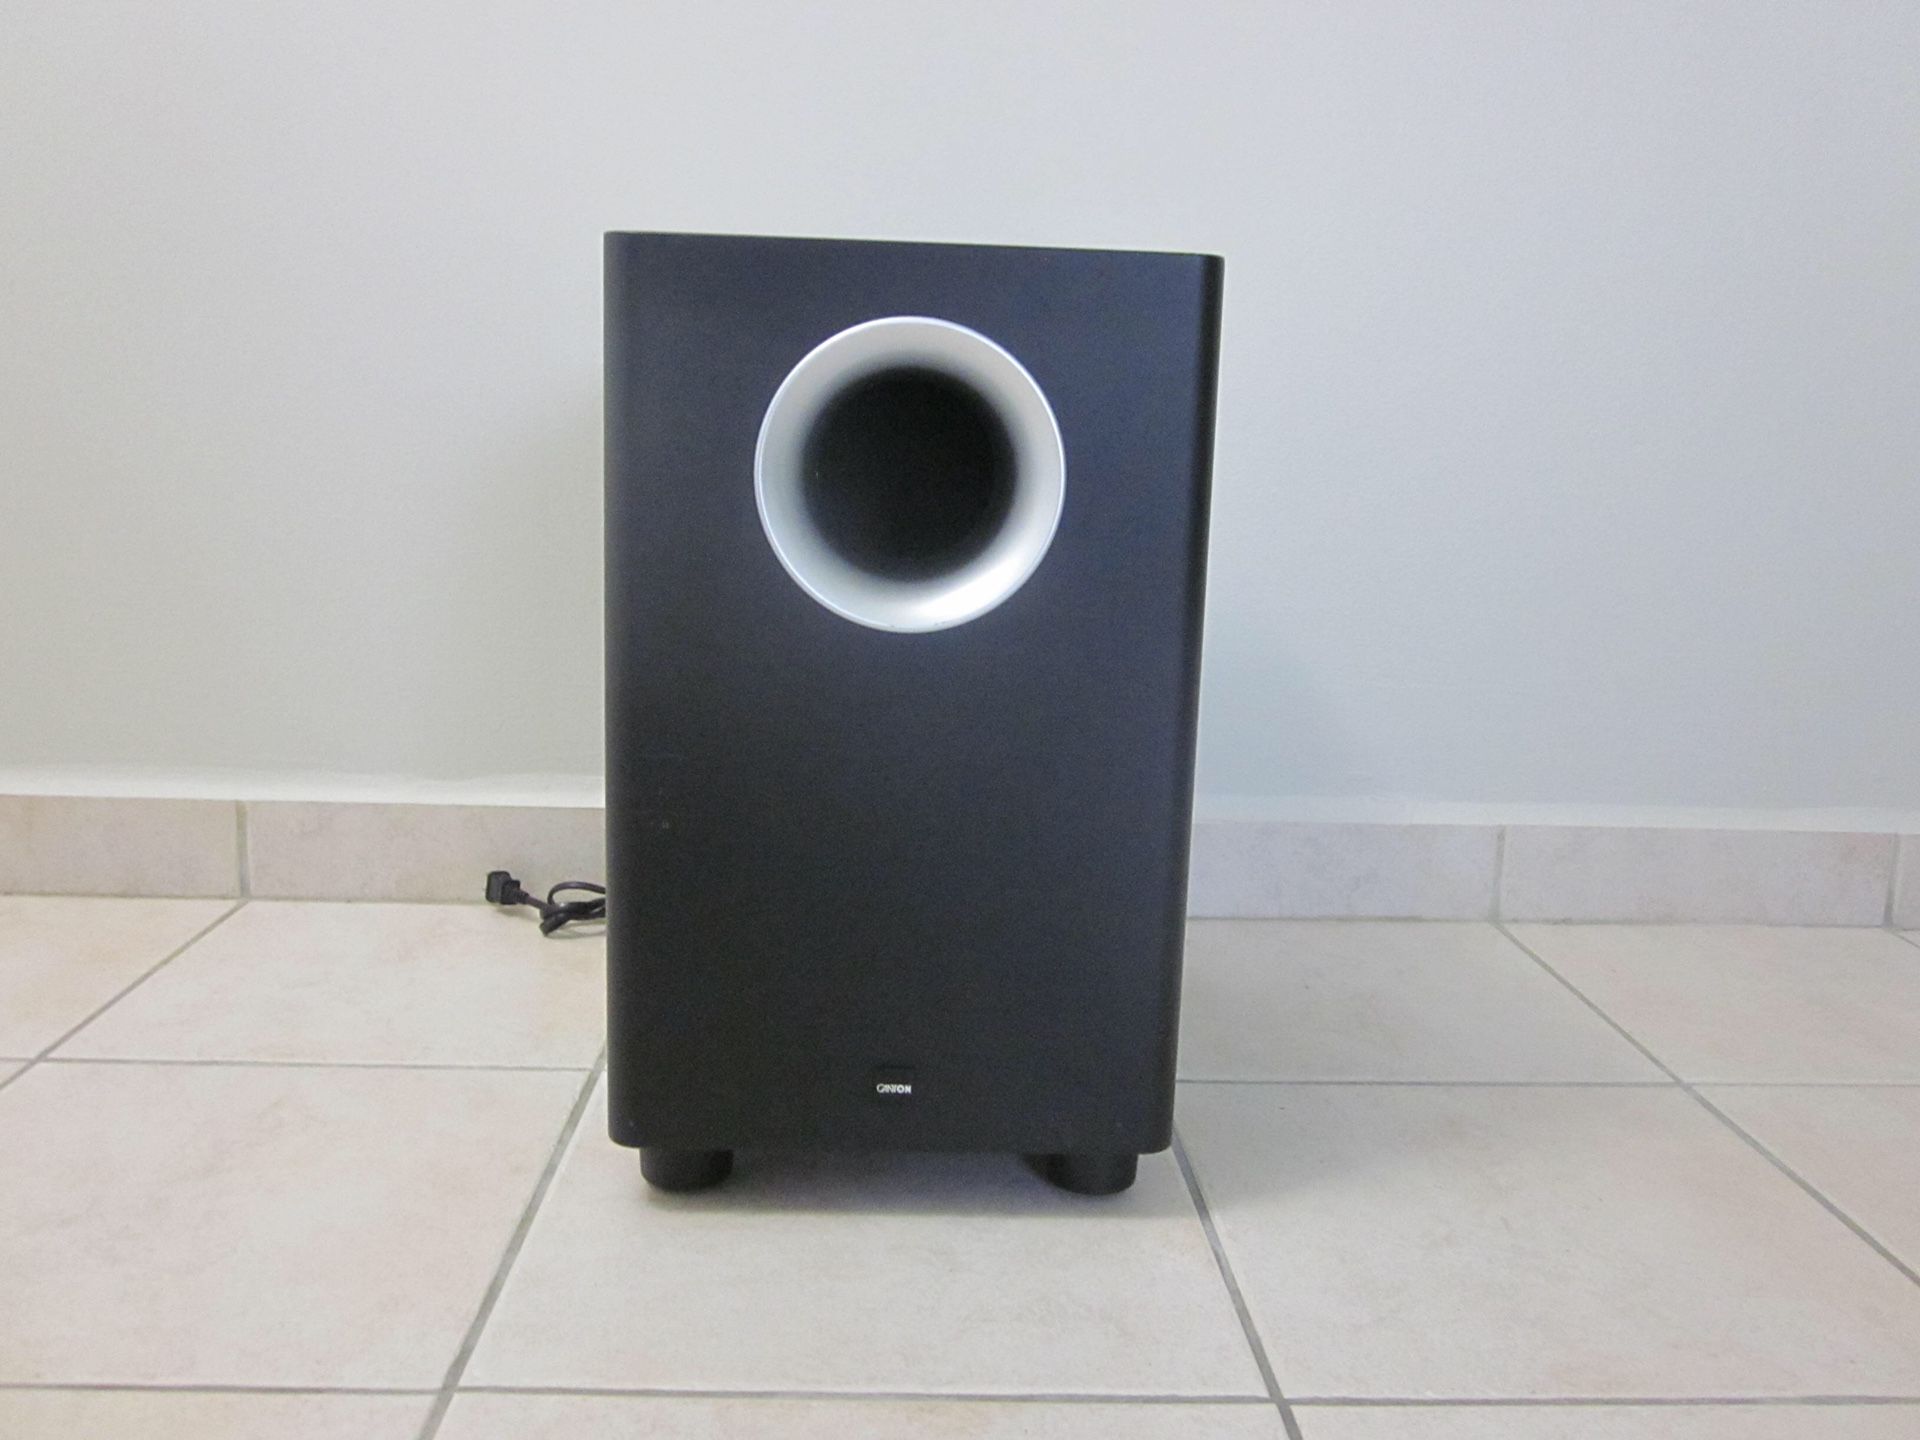 High Quality Subwoofer In Excellent Condition for Sale Miami, FL - OfferUp